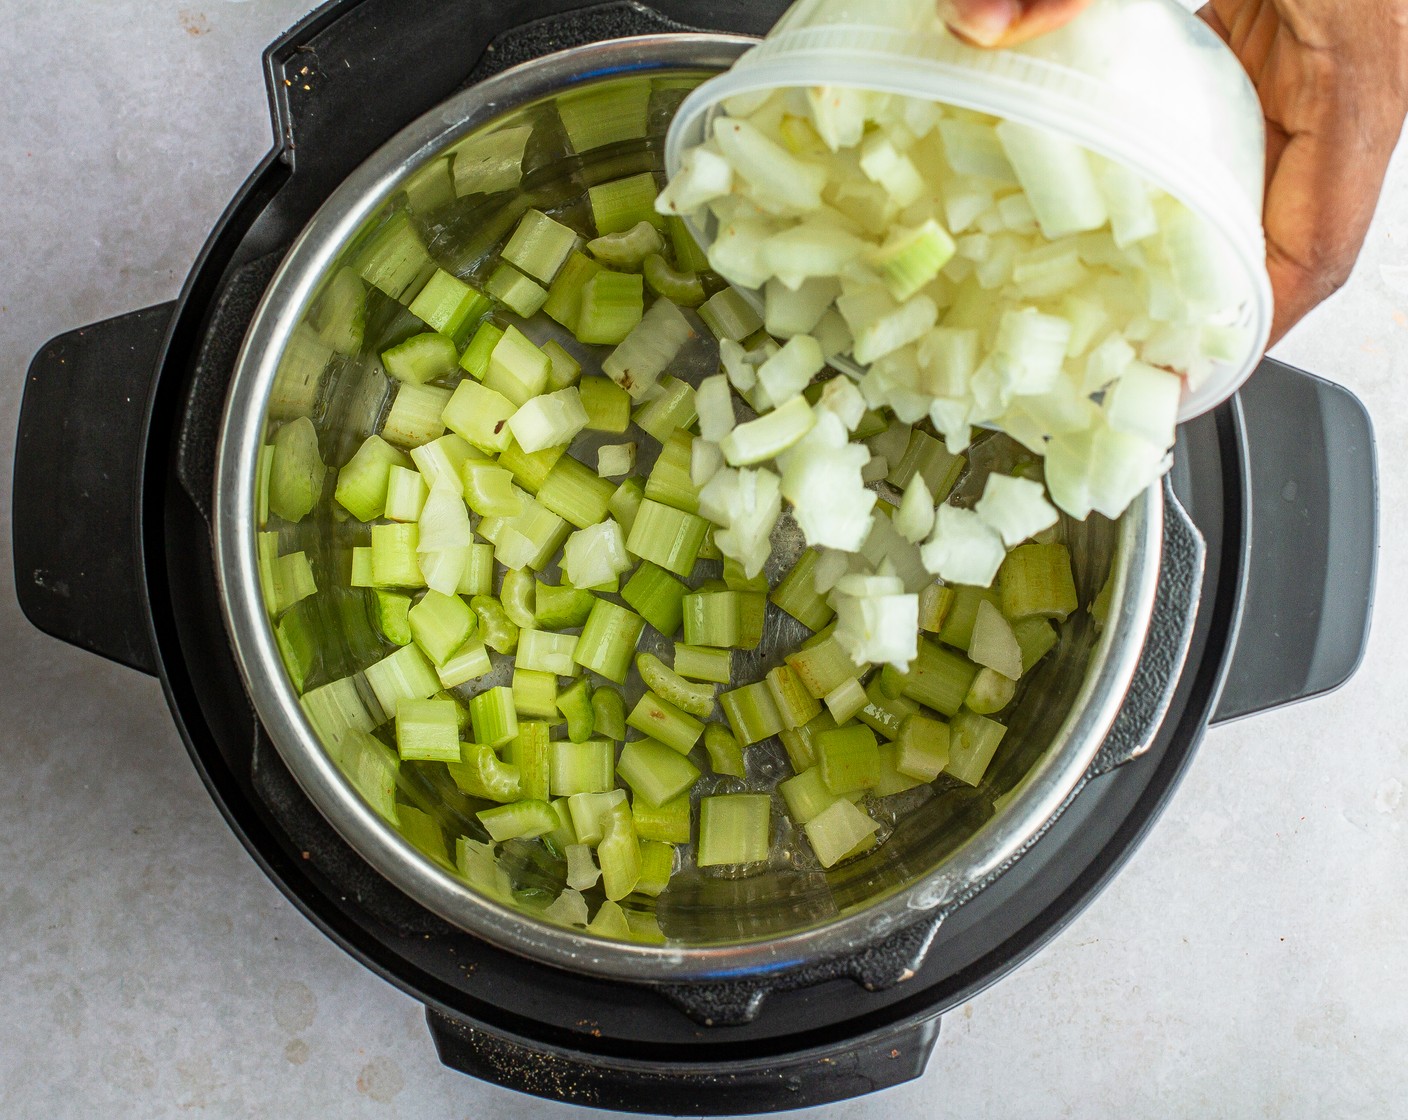 step 1 On a 6 or 8-quart Instant Pot, select the “sauté” mode. Add Unsalted Butter (1 Tbsp), Yellow Onion (1), Celery (3 stalks), Carrots (3), and Kosher Salt (3/4 tsp) and stir. Cook until the onions are translucent, approximately 7 minutes.